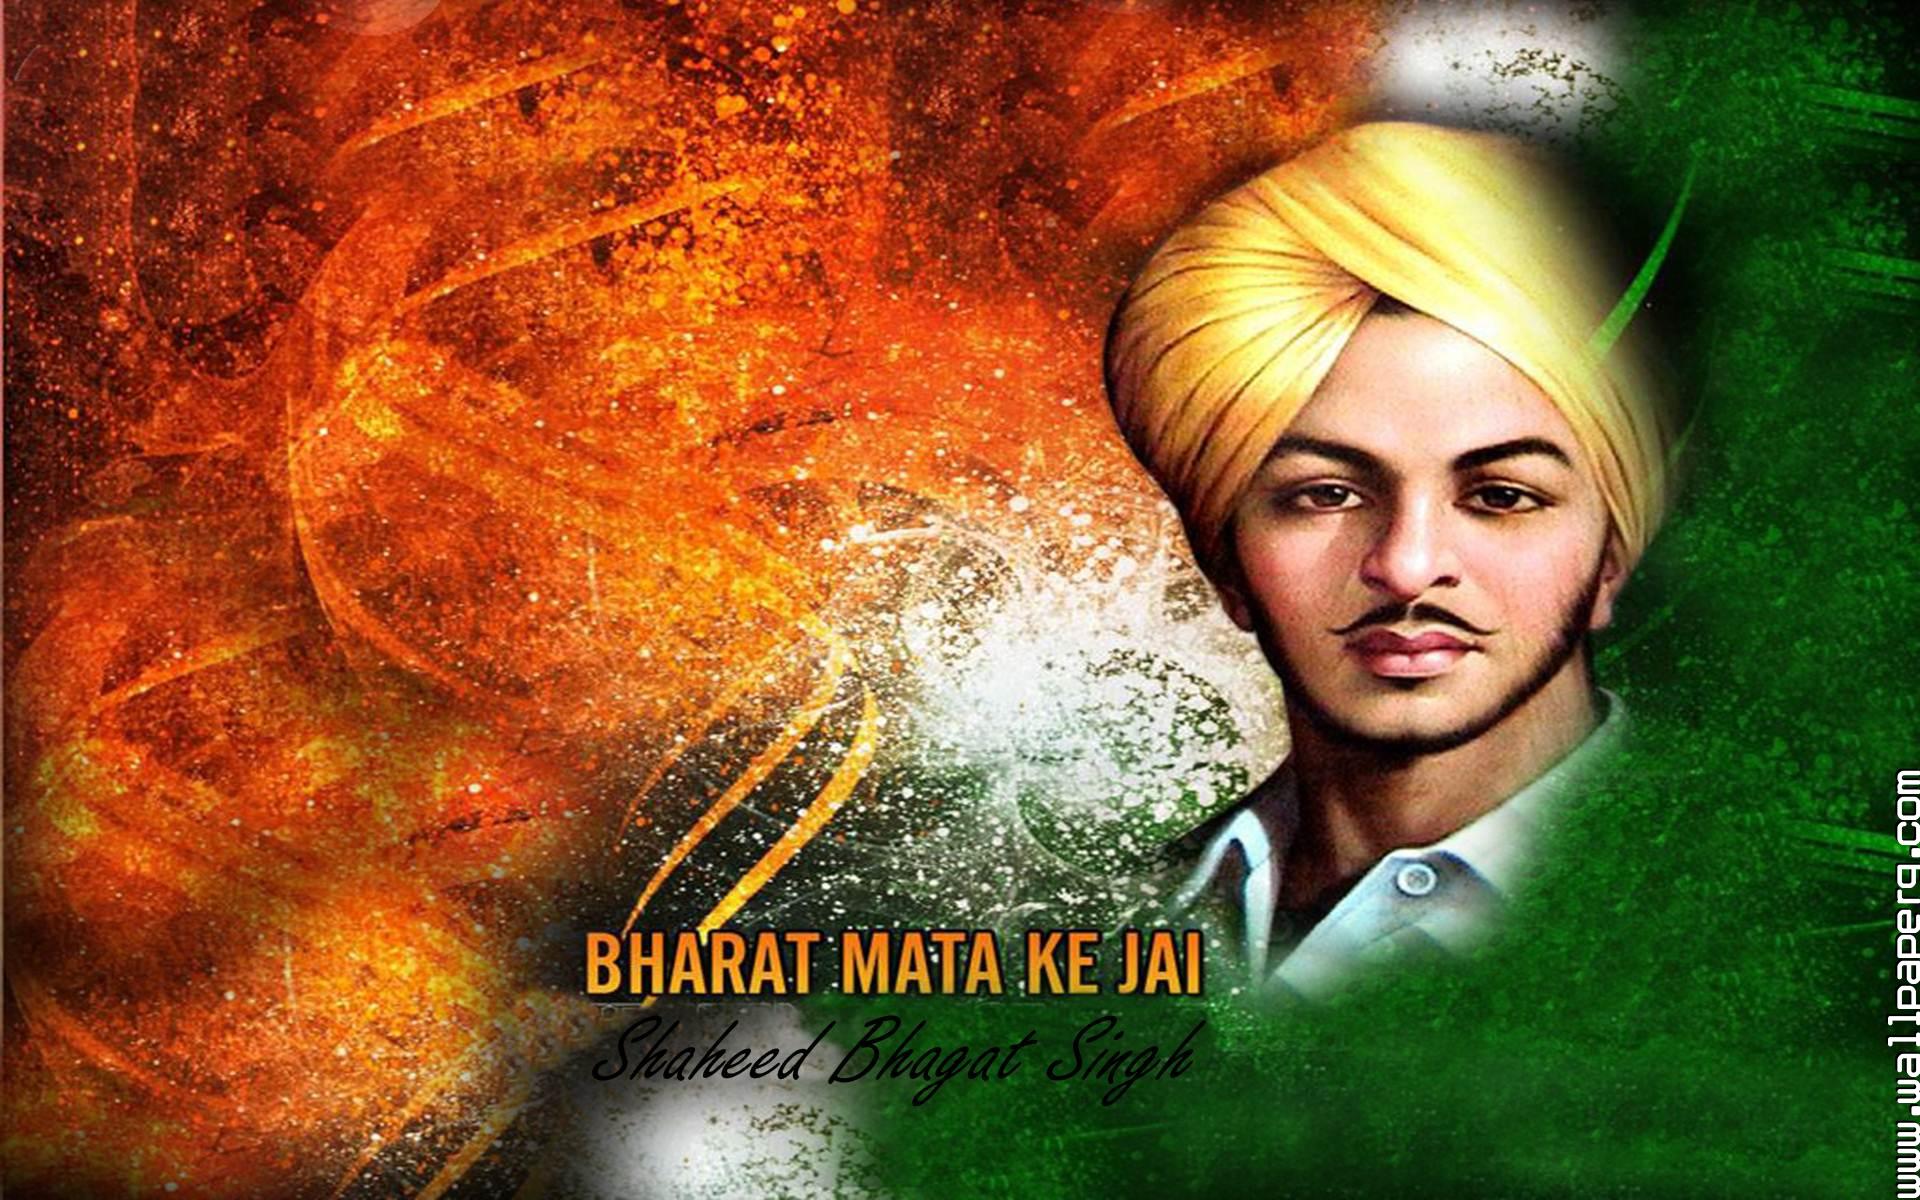 Download Shaheed bhagat singh greetings for republic day day wallpaper for your mobile cell phone